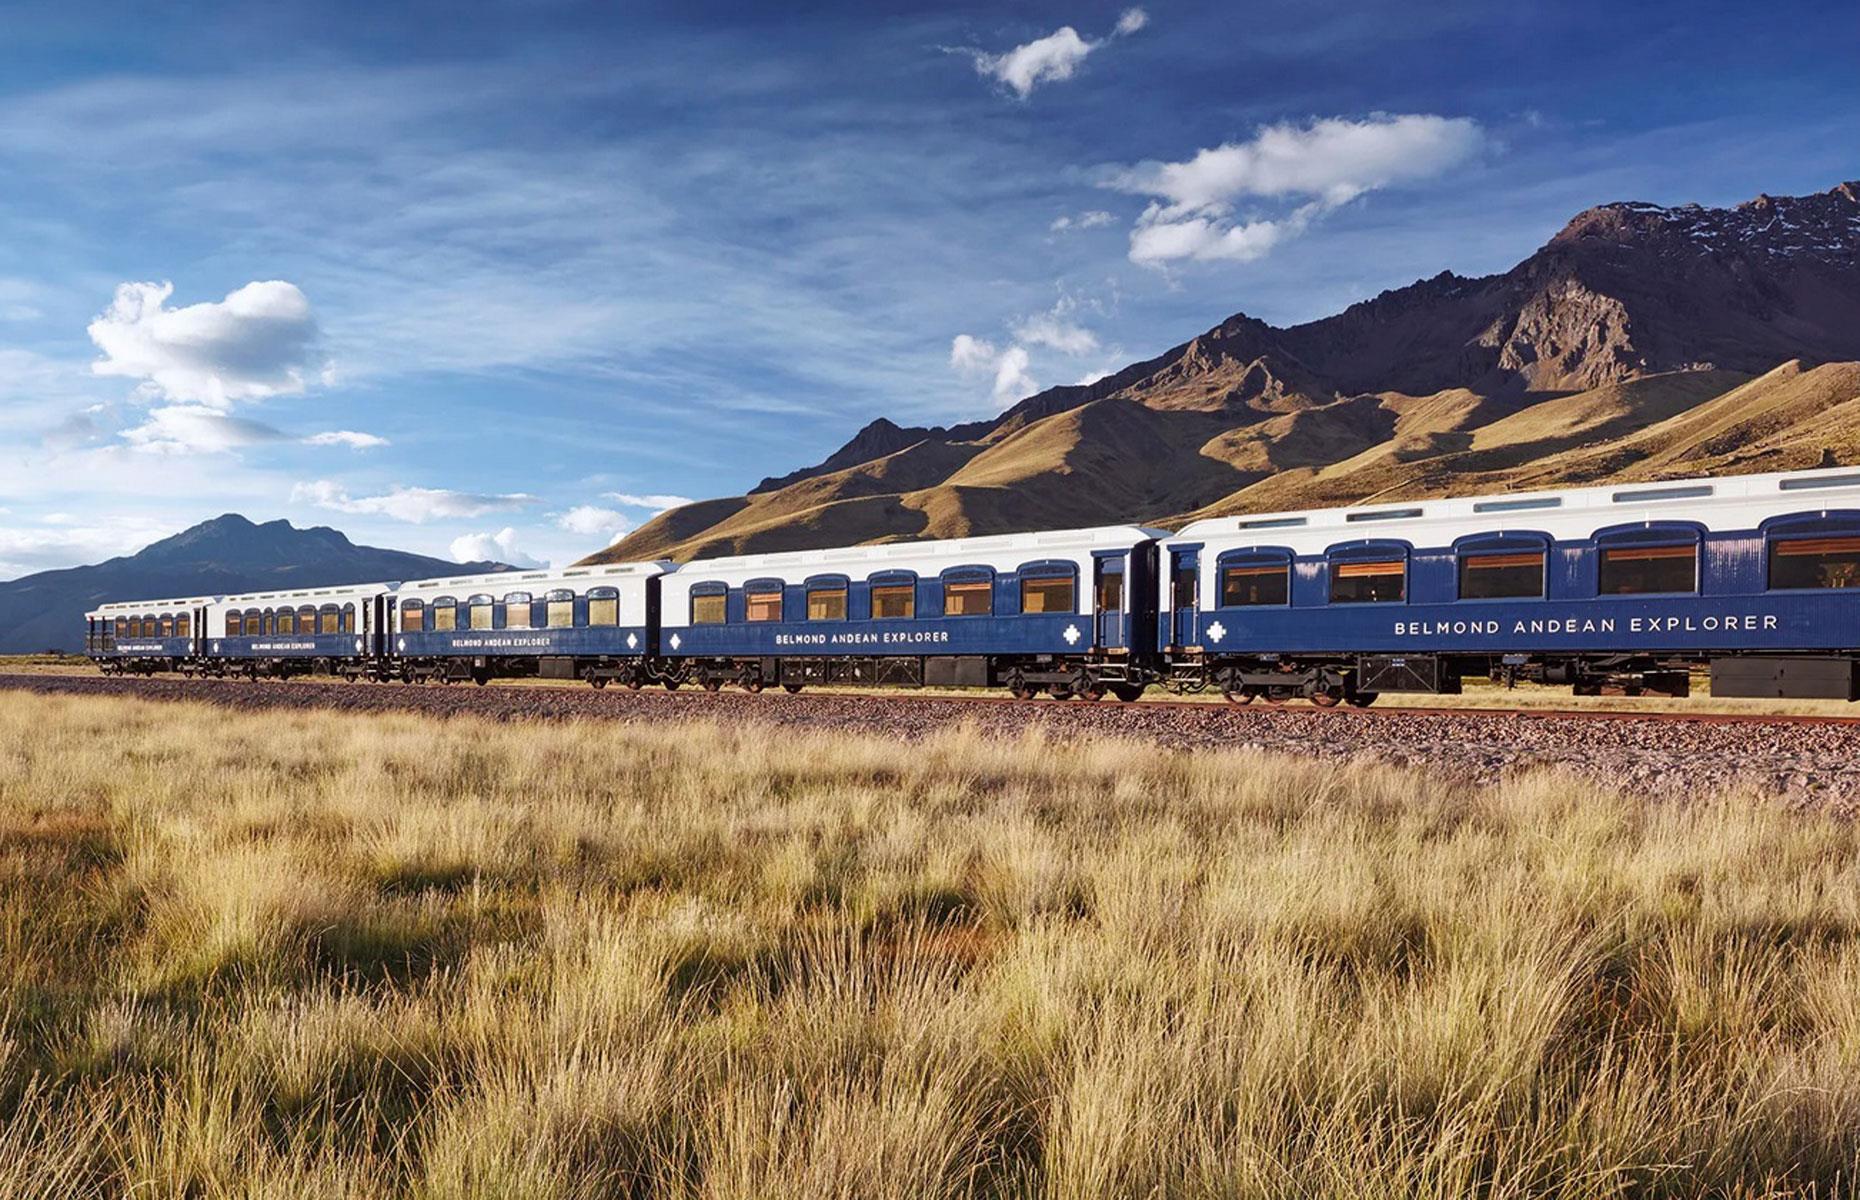 <p>South America's most elegant train, Belmond's <em>Andean Explorer</em> connects the ancient Peruvian cities of Cusco and Arequipa, offering astonishing vistas of the Andes Mountains.</p>  <p>Decorated with furnishings that marry traditional Peruvian style with Art Deco elements, the 16-carriage midnight blue train is a real gem.</p>  <p>Guests are taken on culinary adventures exploring local cuisine in the train's two dining cars. They can also relax with a cocktail in the lounge car or boost their wellbeing in the spa carriage.</p>